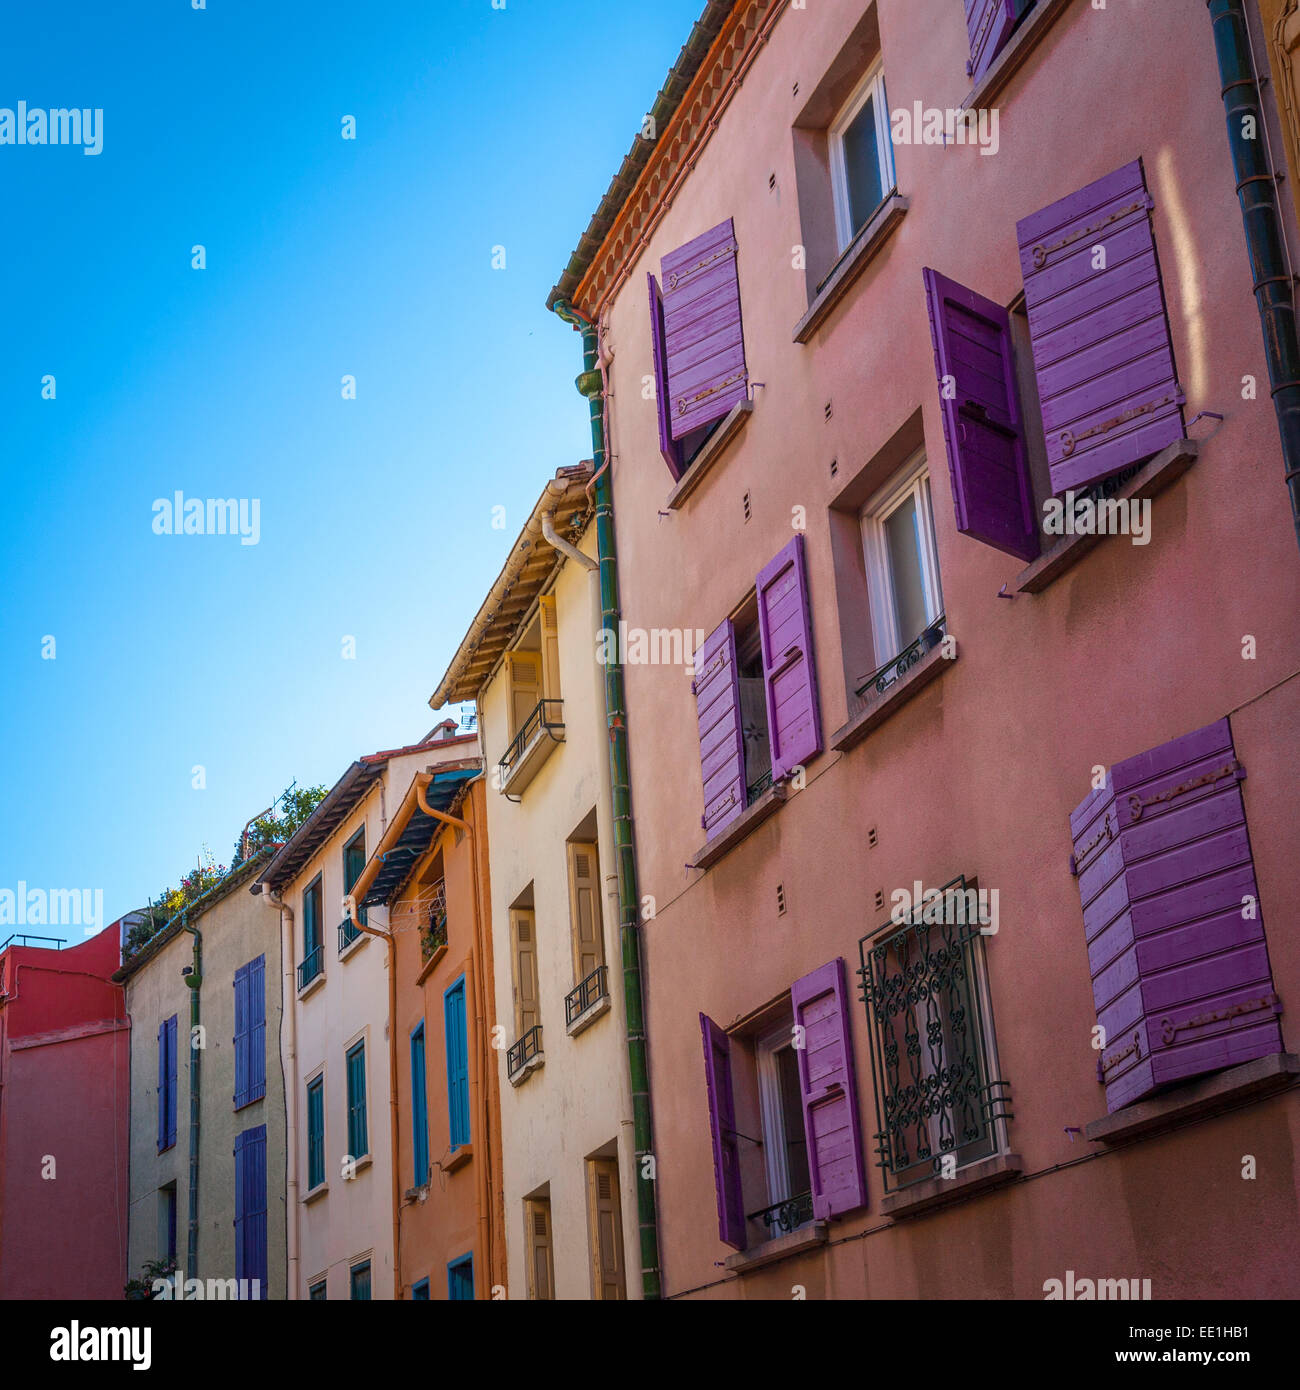 Colourful shutters and facades, Collioure, Pyrenees-Orientales, Languedoc-Roussillon, France, Europe Stock Photo